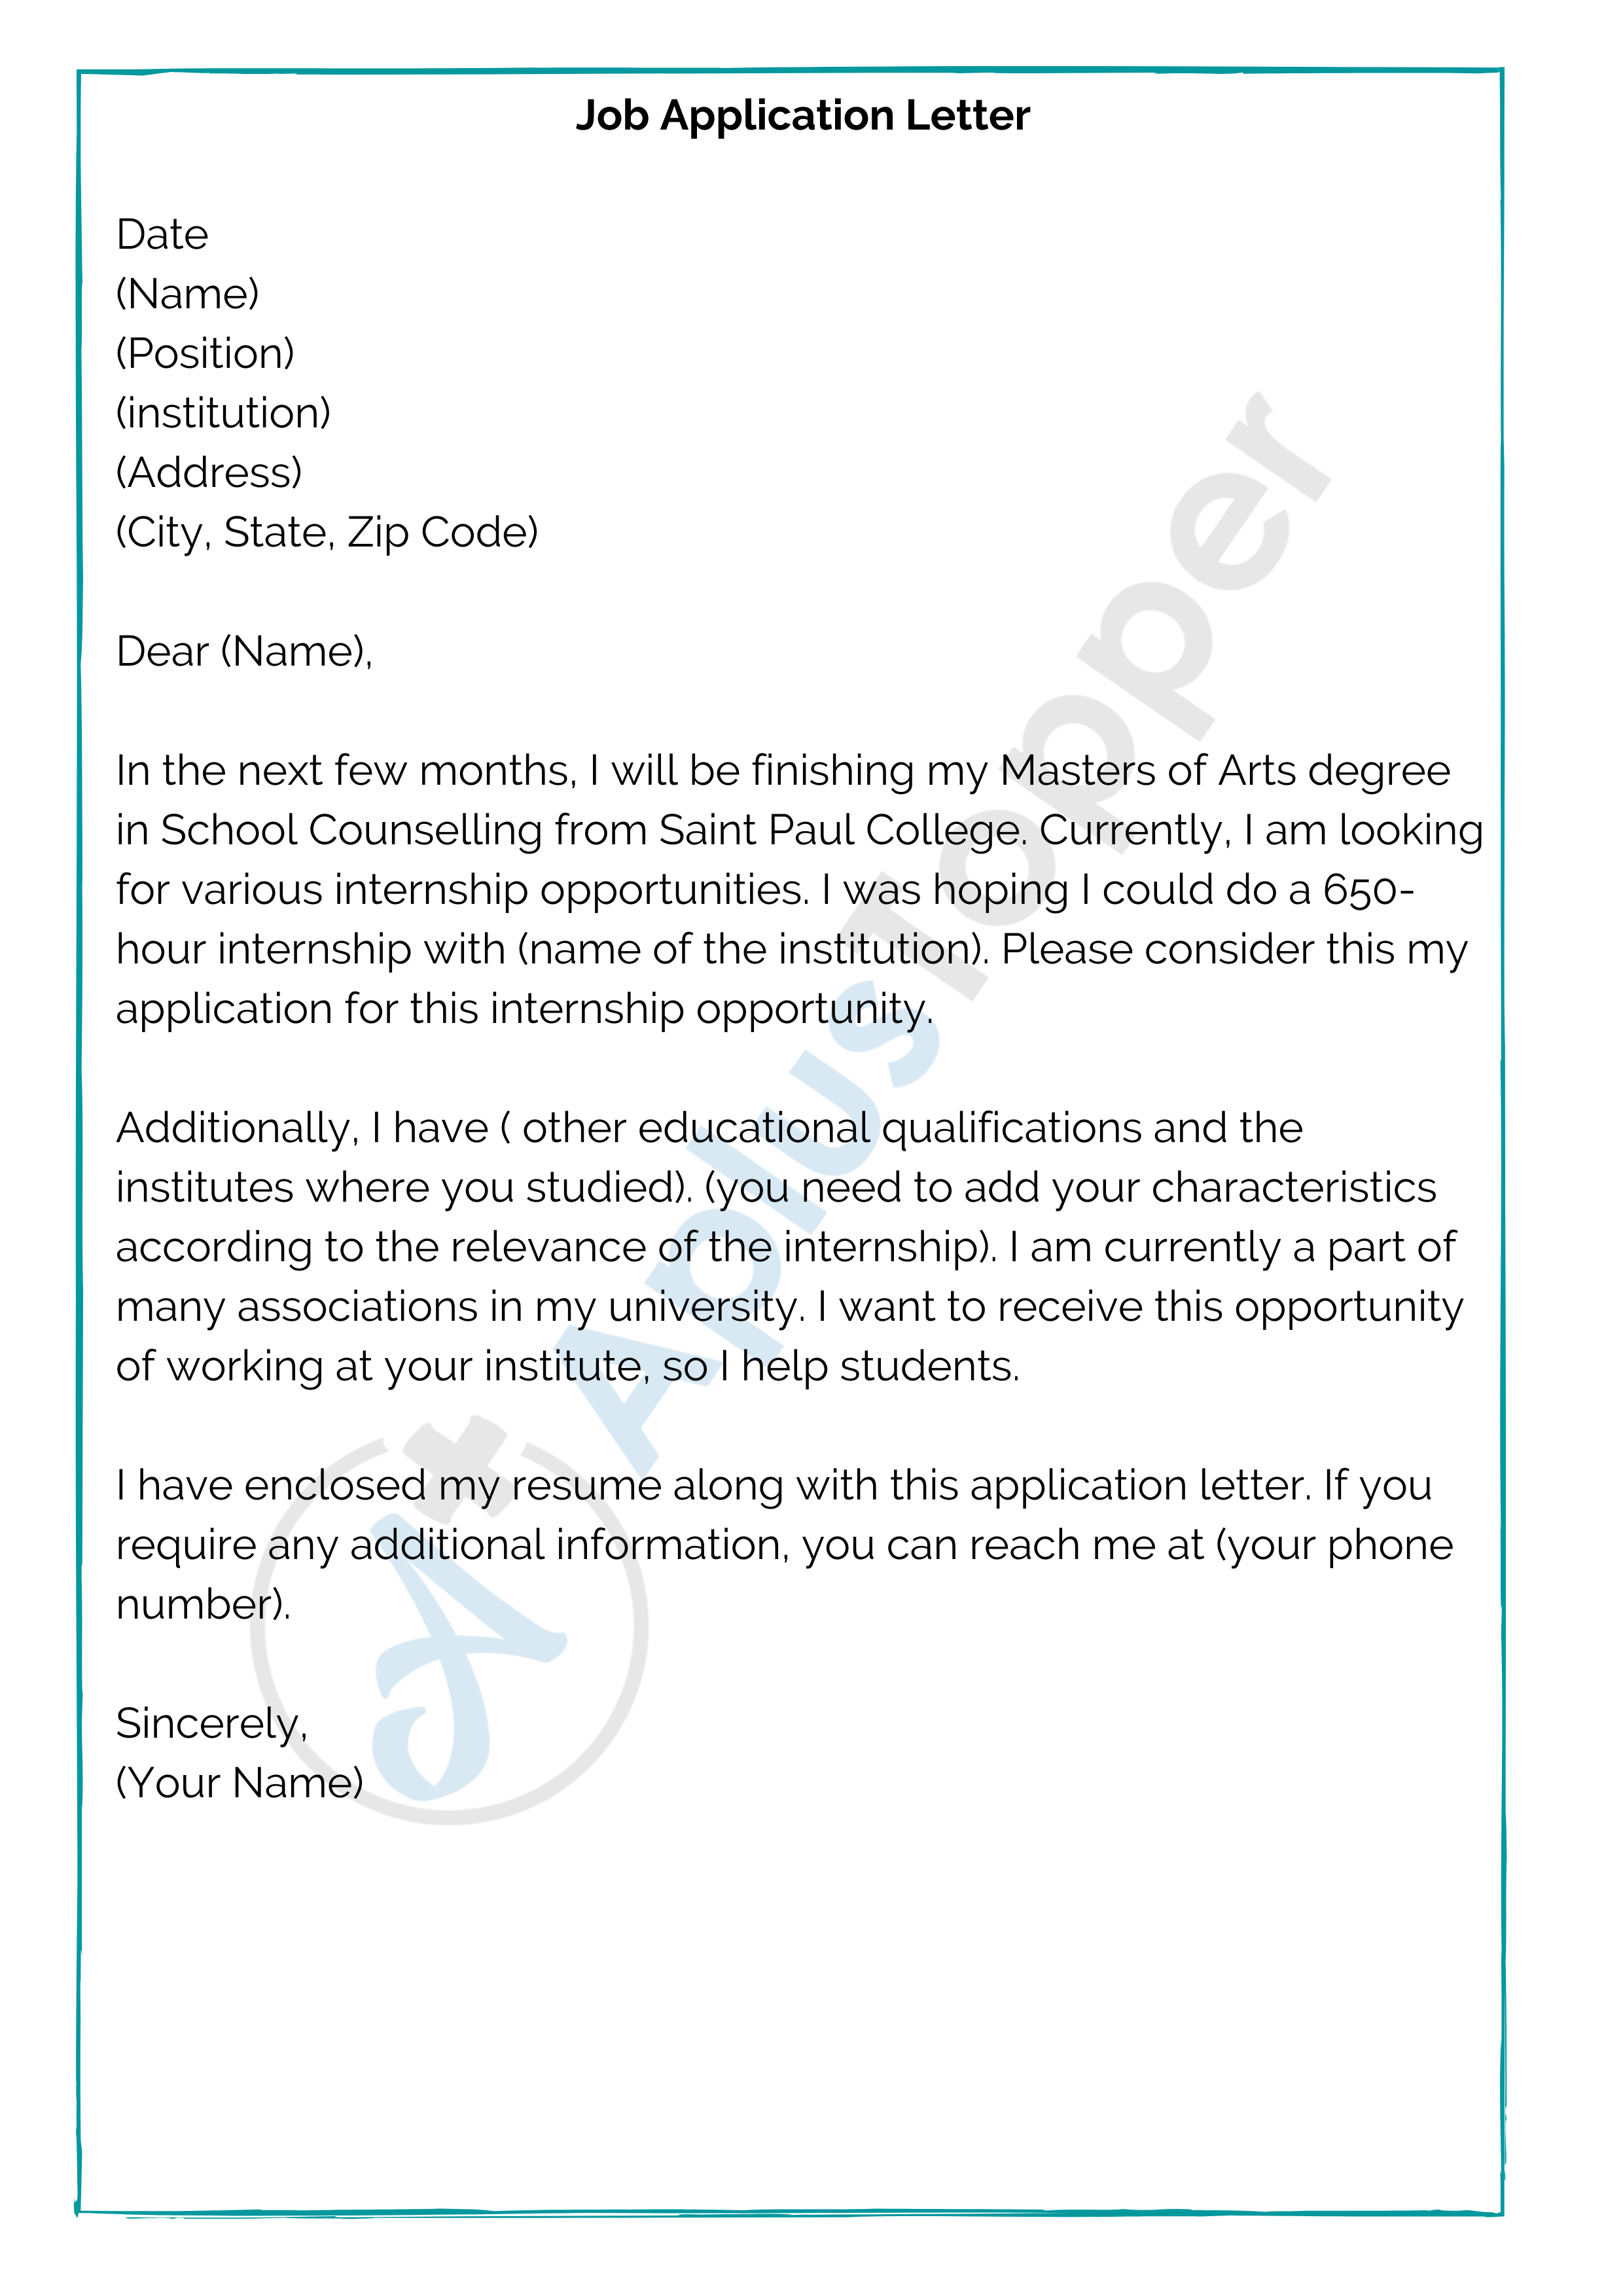 how to set out a job application letter